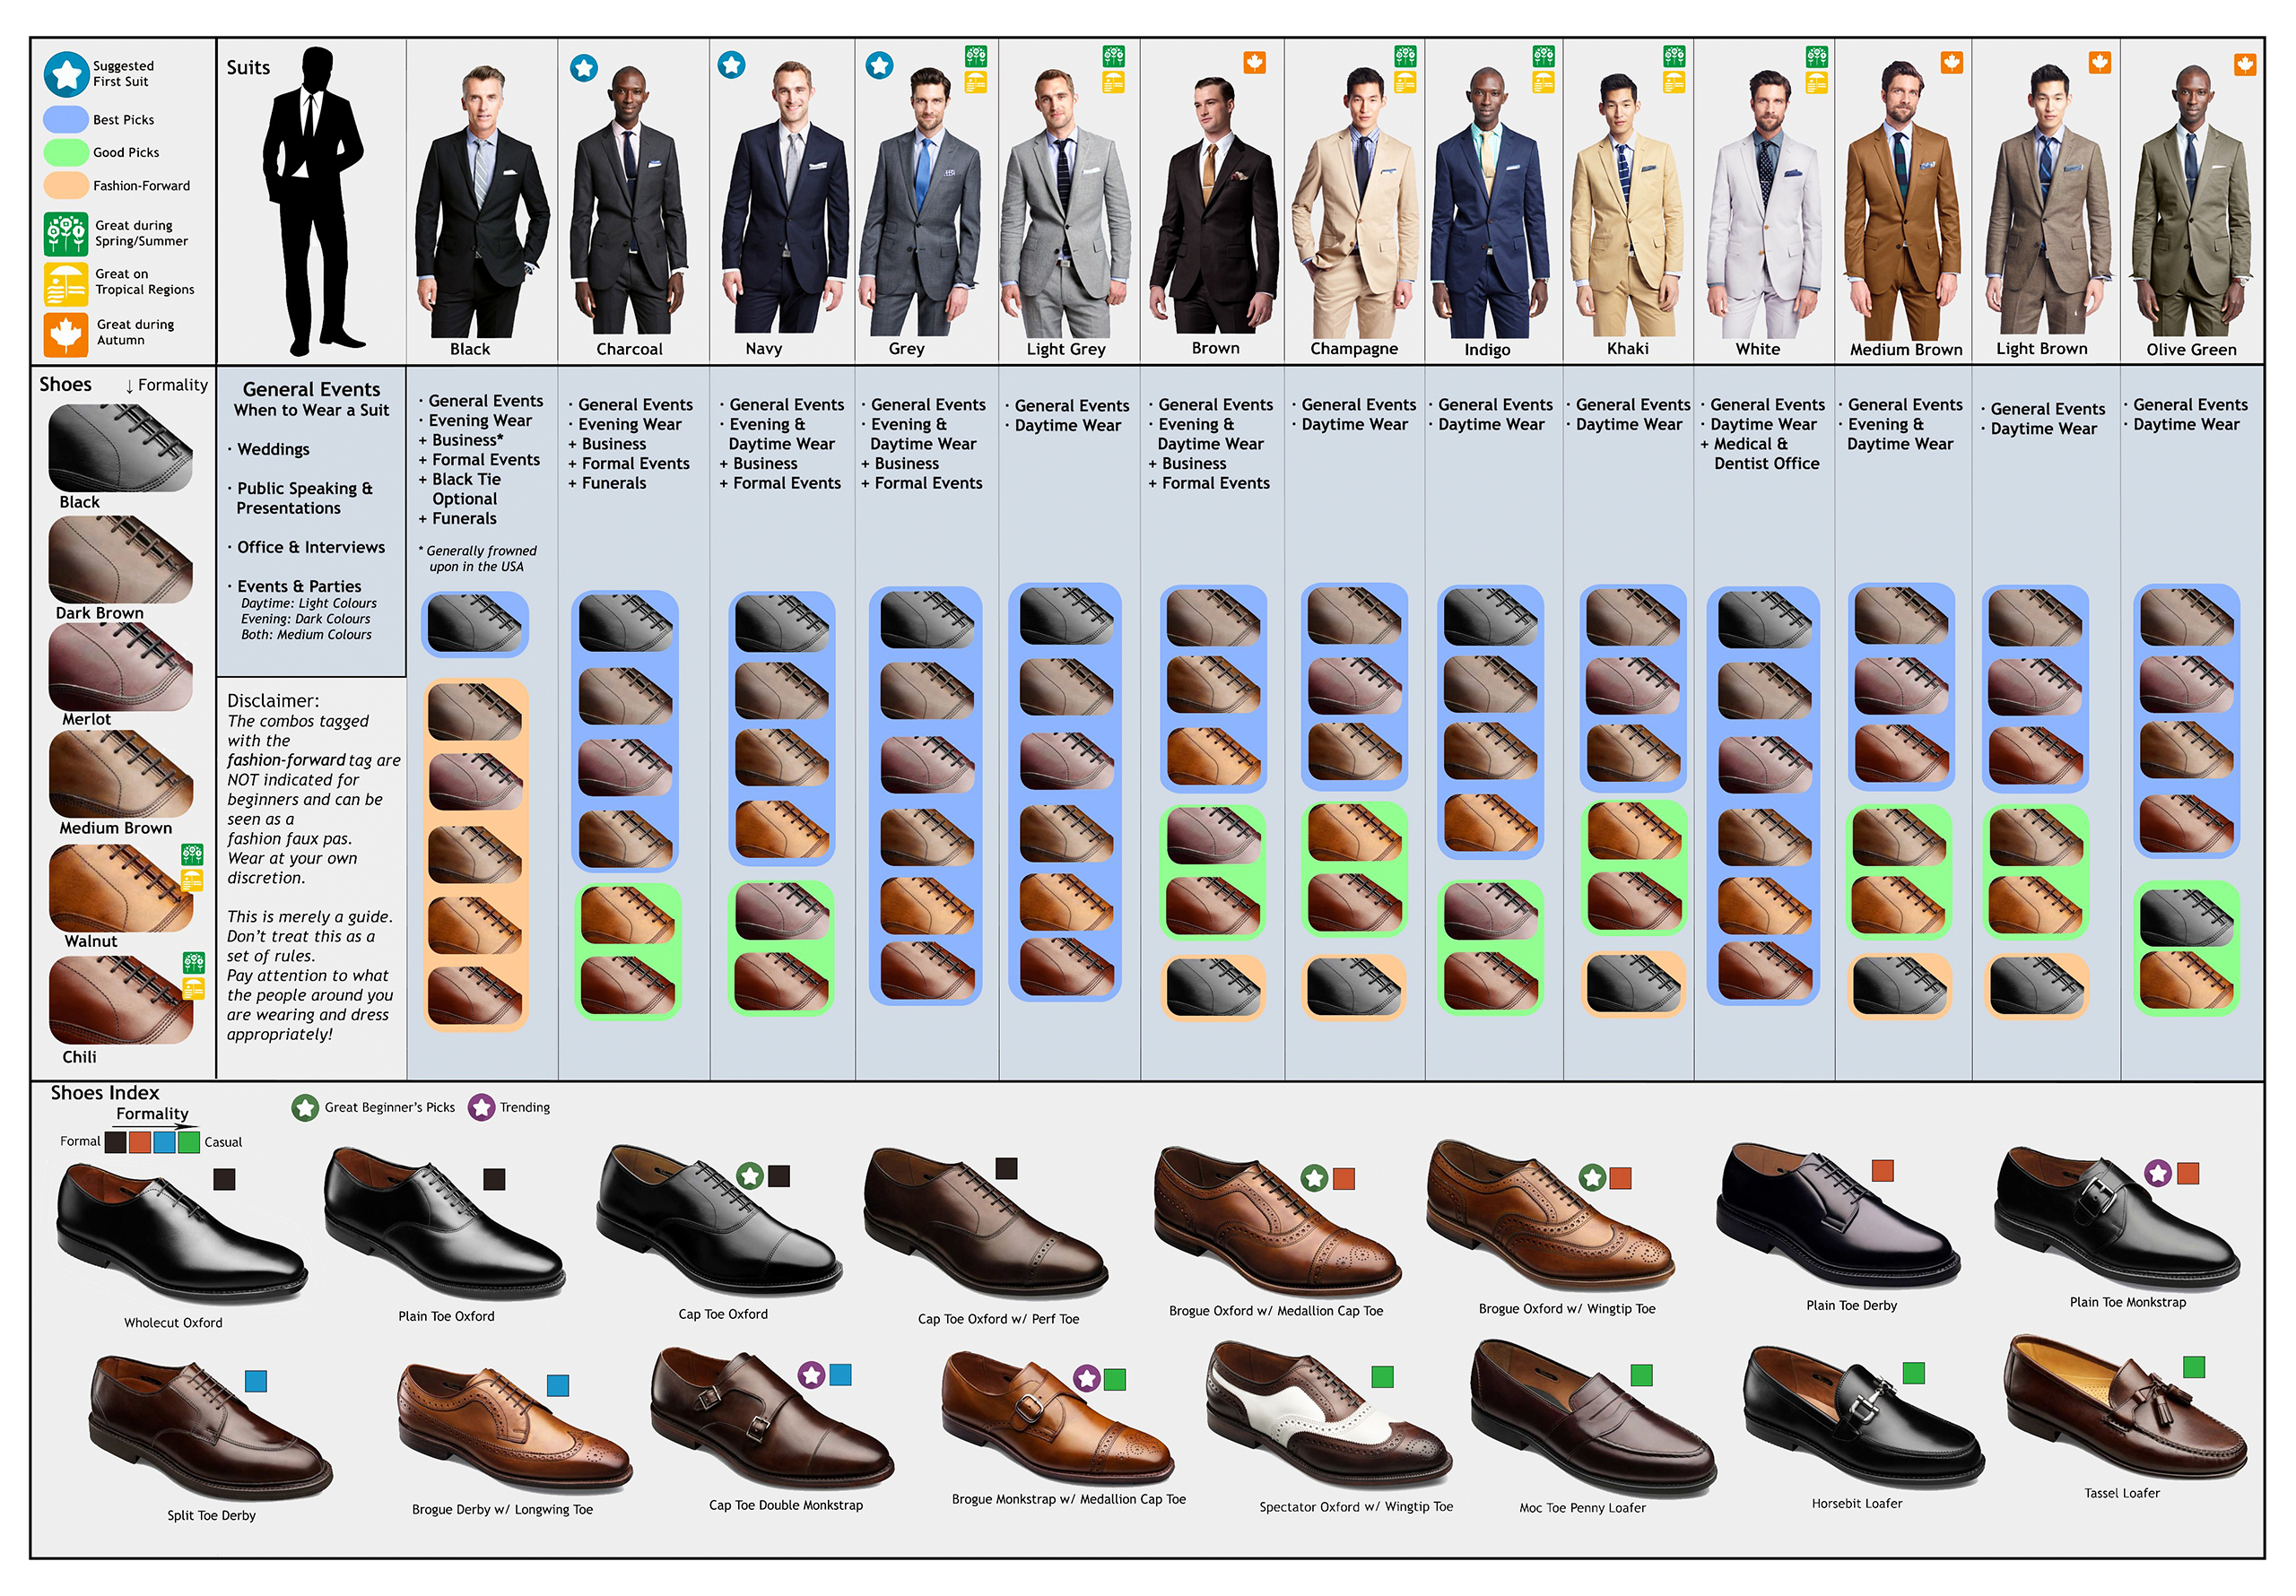 Best Men's Dress Shoes & How to Find the Perfect Pair